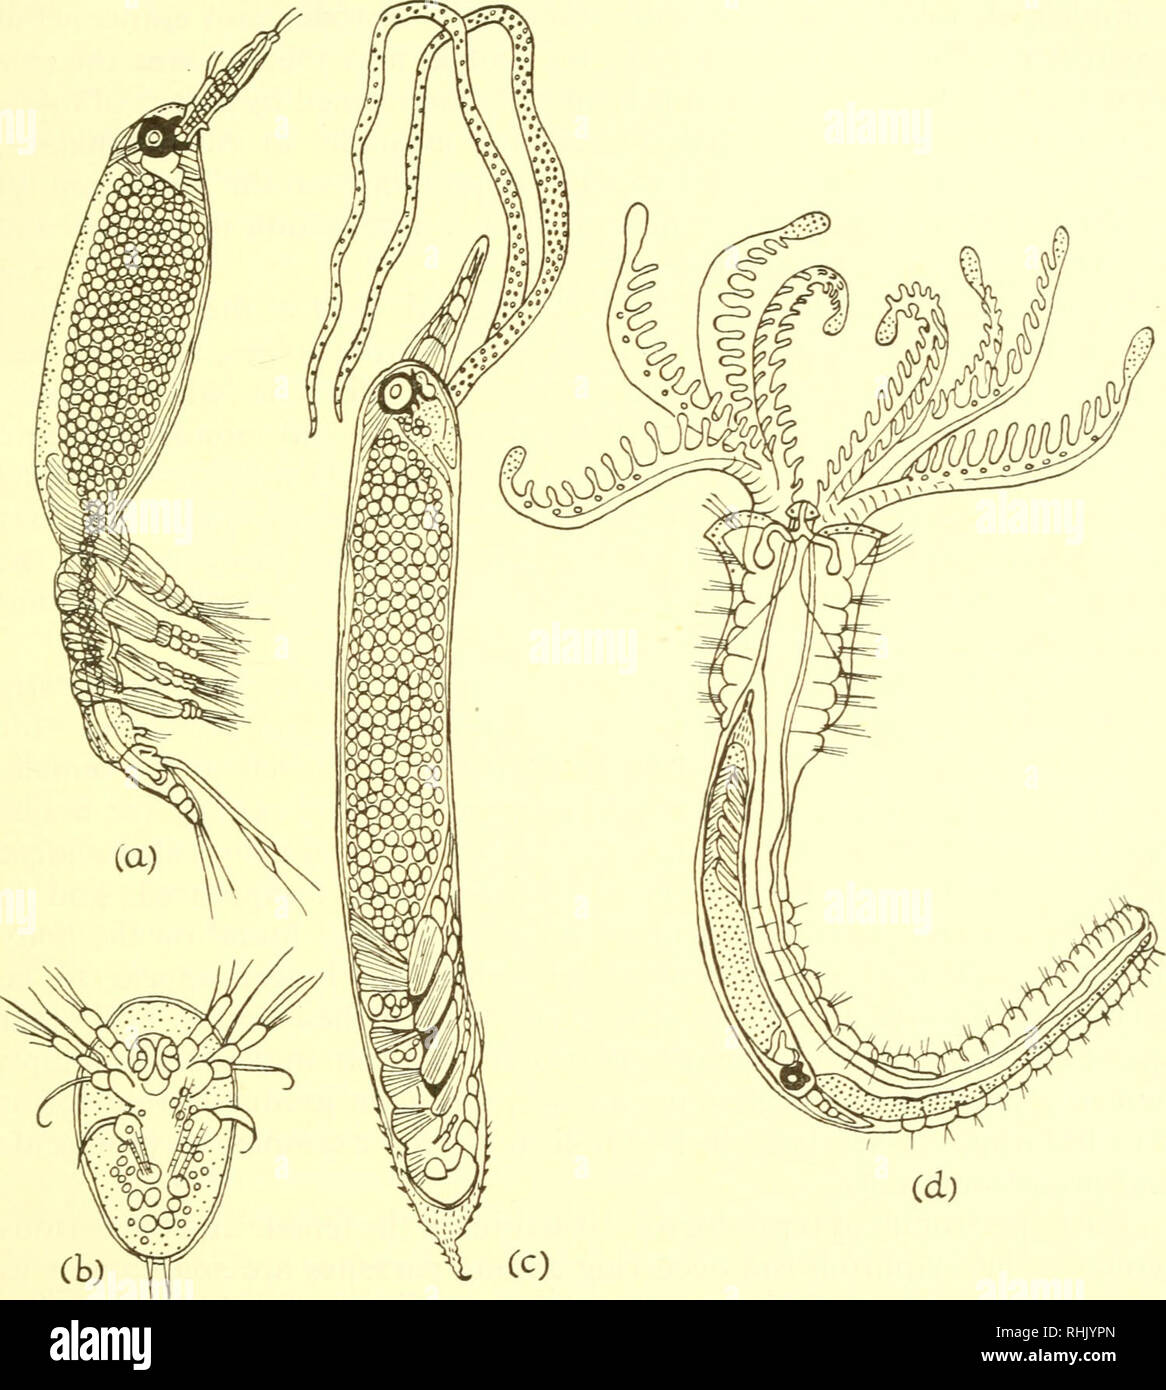 . The biology of marine animals. Marine animals; Physiology, Comparative. ASSOCIATIONS 607 Conclusions Probably the most striking aspect of parasitism is the trend towards morphological degeneration. In incipient parasitism, such as seen in the copepod Caligus, the parasite differs only slightly from independent forms.. Fig. 14.17. Developmental Stages in the Monstrillid Copepod Cymbasoma rigidum (= Haemocera danae) (a) Pelagic adult; (b) nauplius larva; (c) female parasite removed from its host; (d) parasite in position in its host (Salmacina dysteri). (Redrawn from Malaquin (65).) It is some Stock Photo